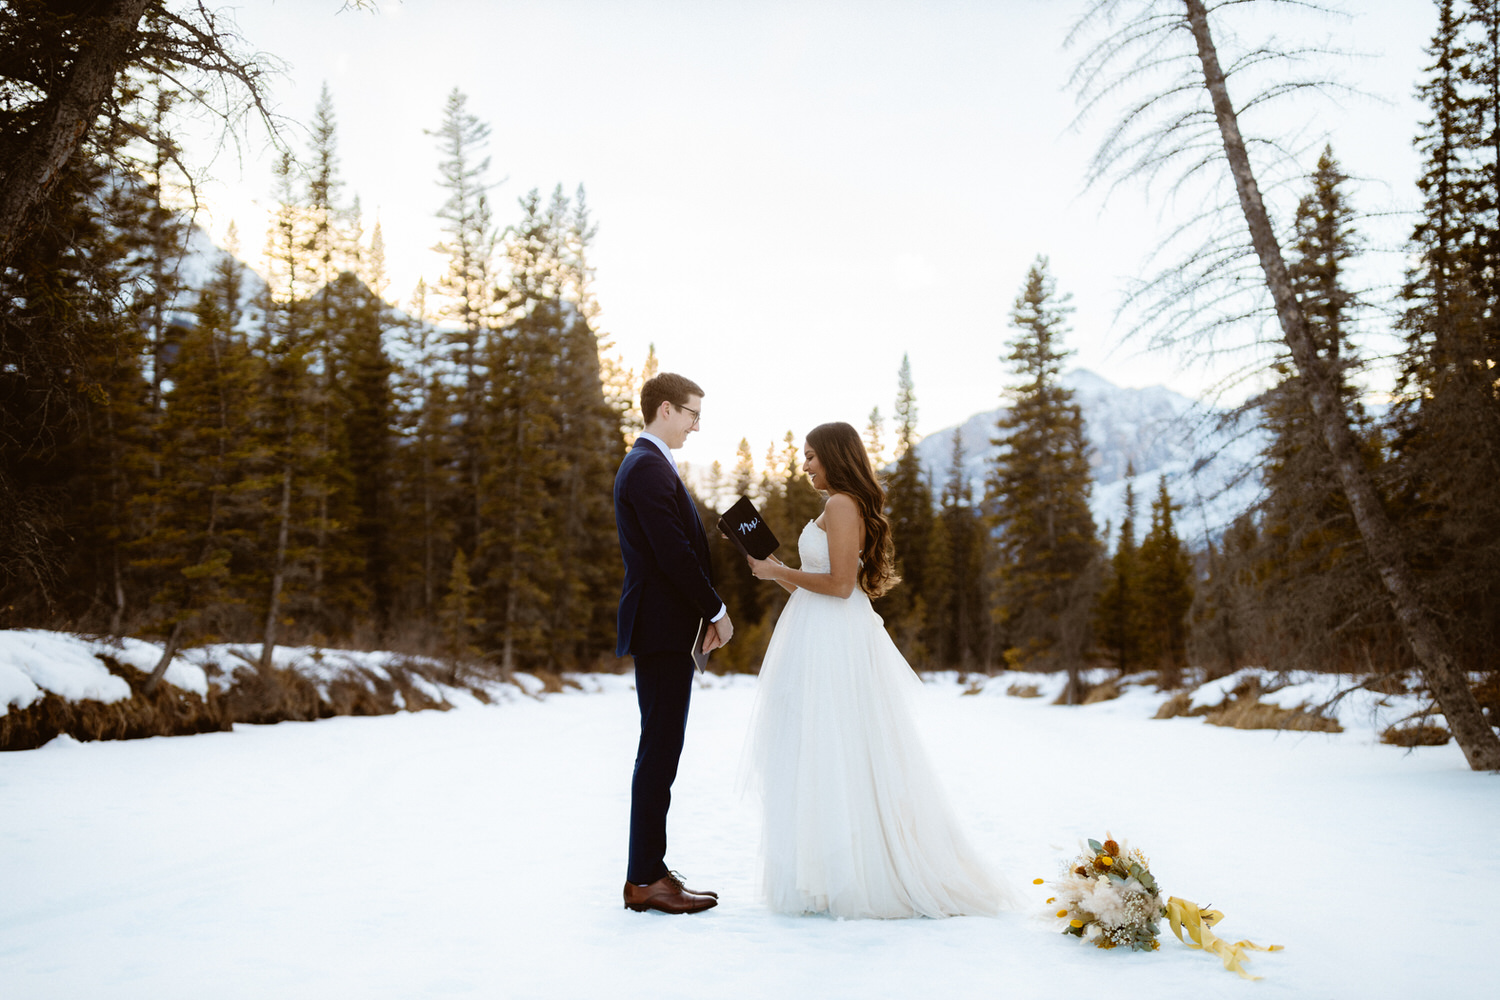 Canmore wedding videographers - Image 19